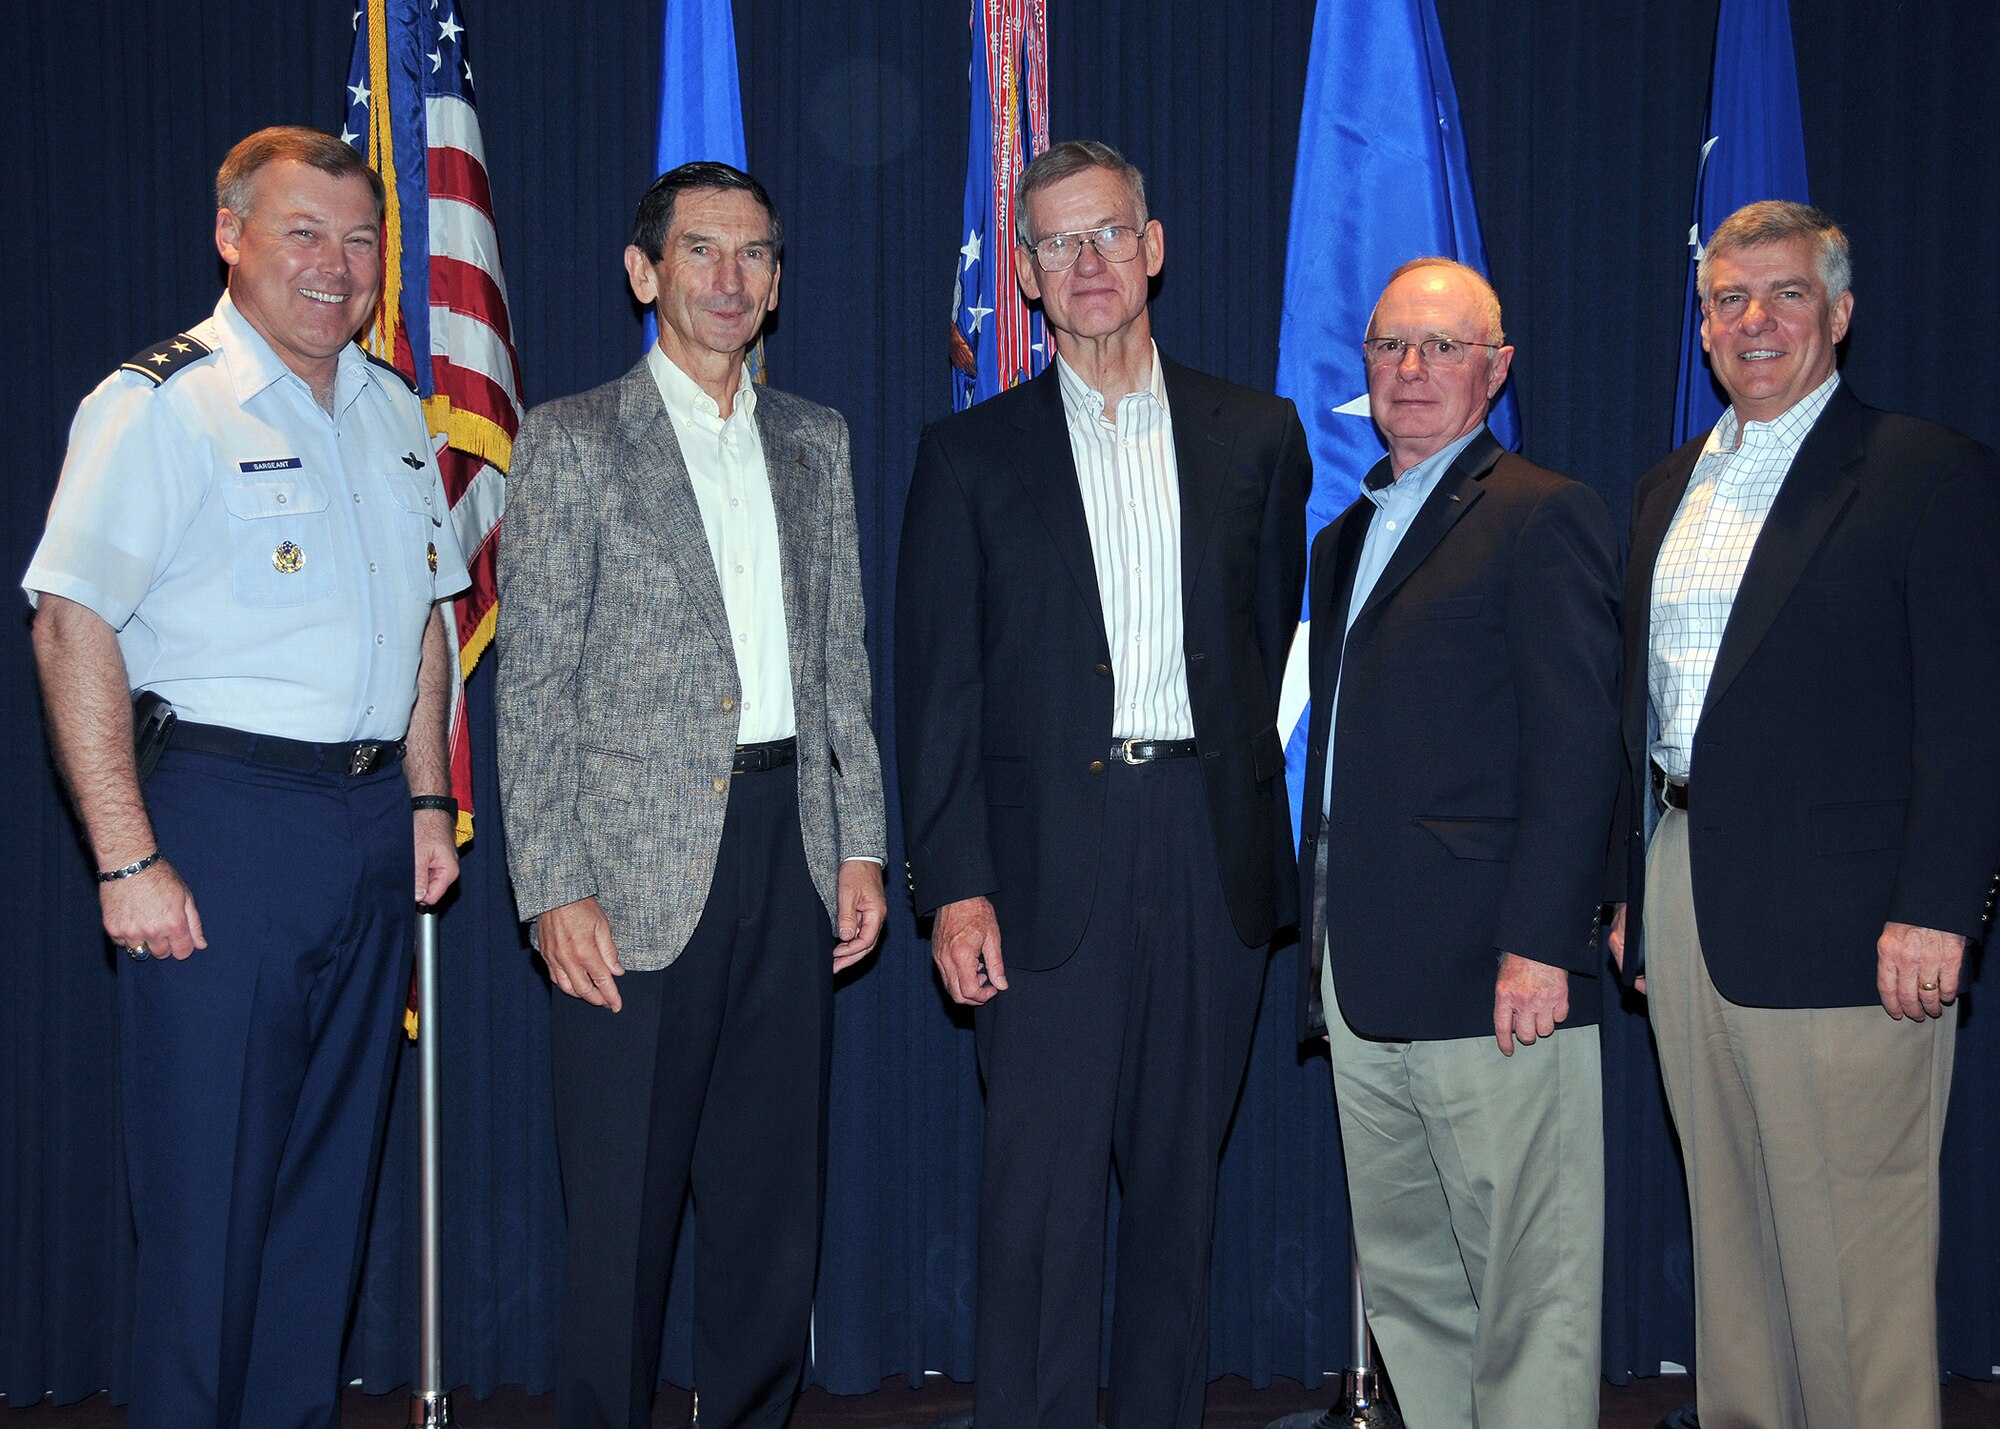 The Air Force Operational Test and Evaluation Center hosted four former AFOTEC commanders May 11-12 at AFOTEC’s headquarters at Kirtland Air Force Base, N.M. From left to right: Maj. Gen. Stephen T. Sargeant (current AFOTEC commander); retired Lt. Gen. Marcus Anderson (1991-1993); retired Maj. Gen. Peter Robinson (1990-1991); retired Maj. Gen. George Harrison (1993-1997); and retired Maj. Gen. Felix Dupré (2003-2005).